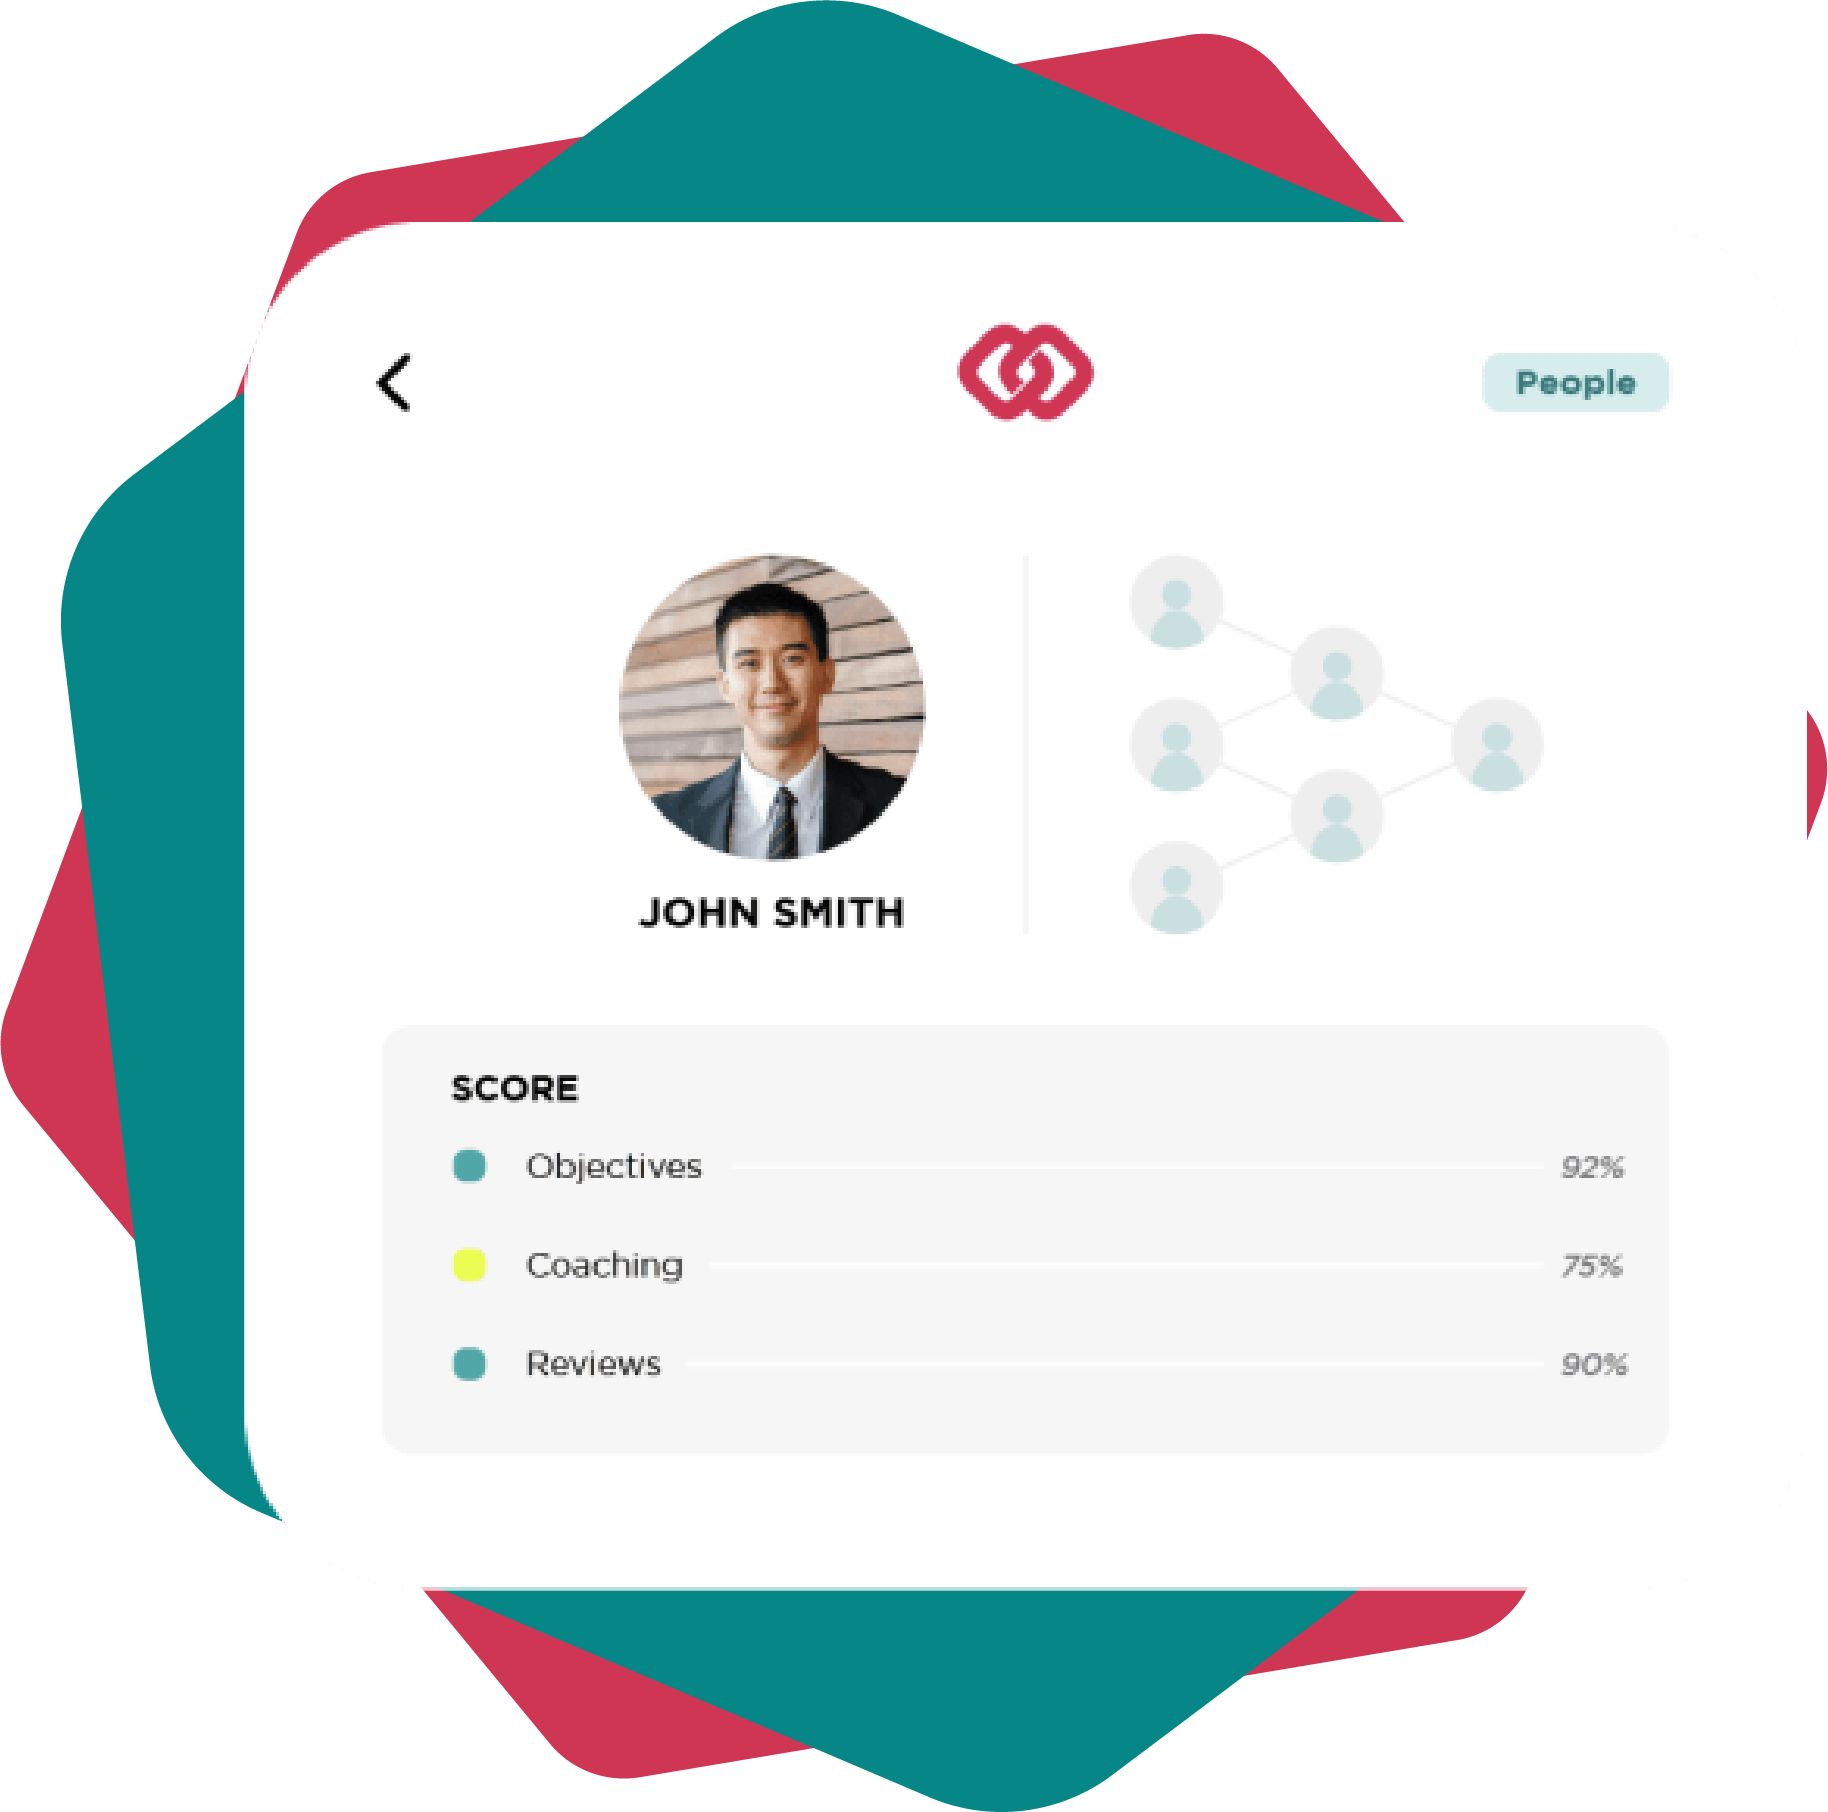 ENHANCE THE EMPLOYEE EXPERIENCE<br />
 with etho by Performance Scoring.Track individual performance and access meaningful talking points for coaching conversations.